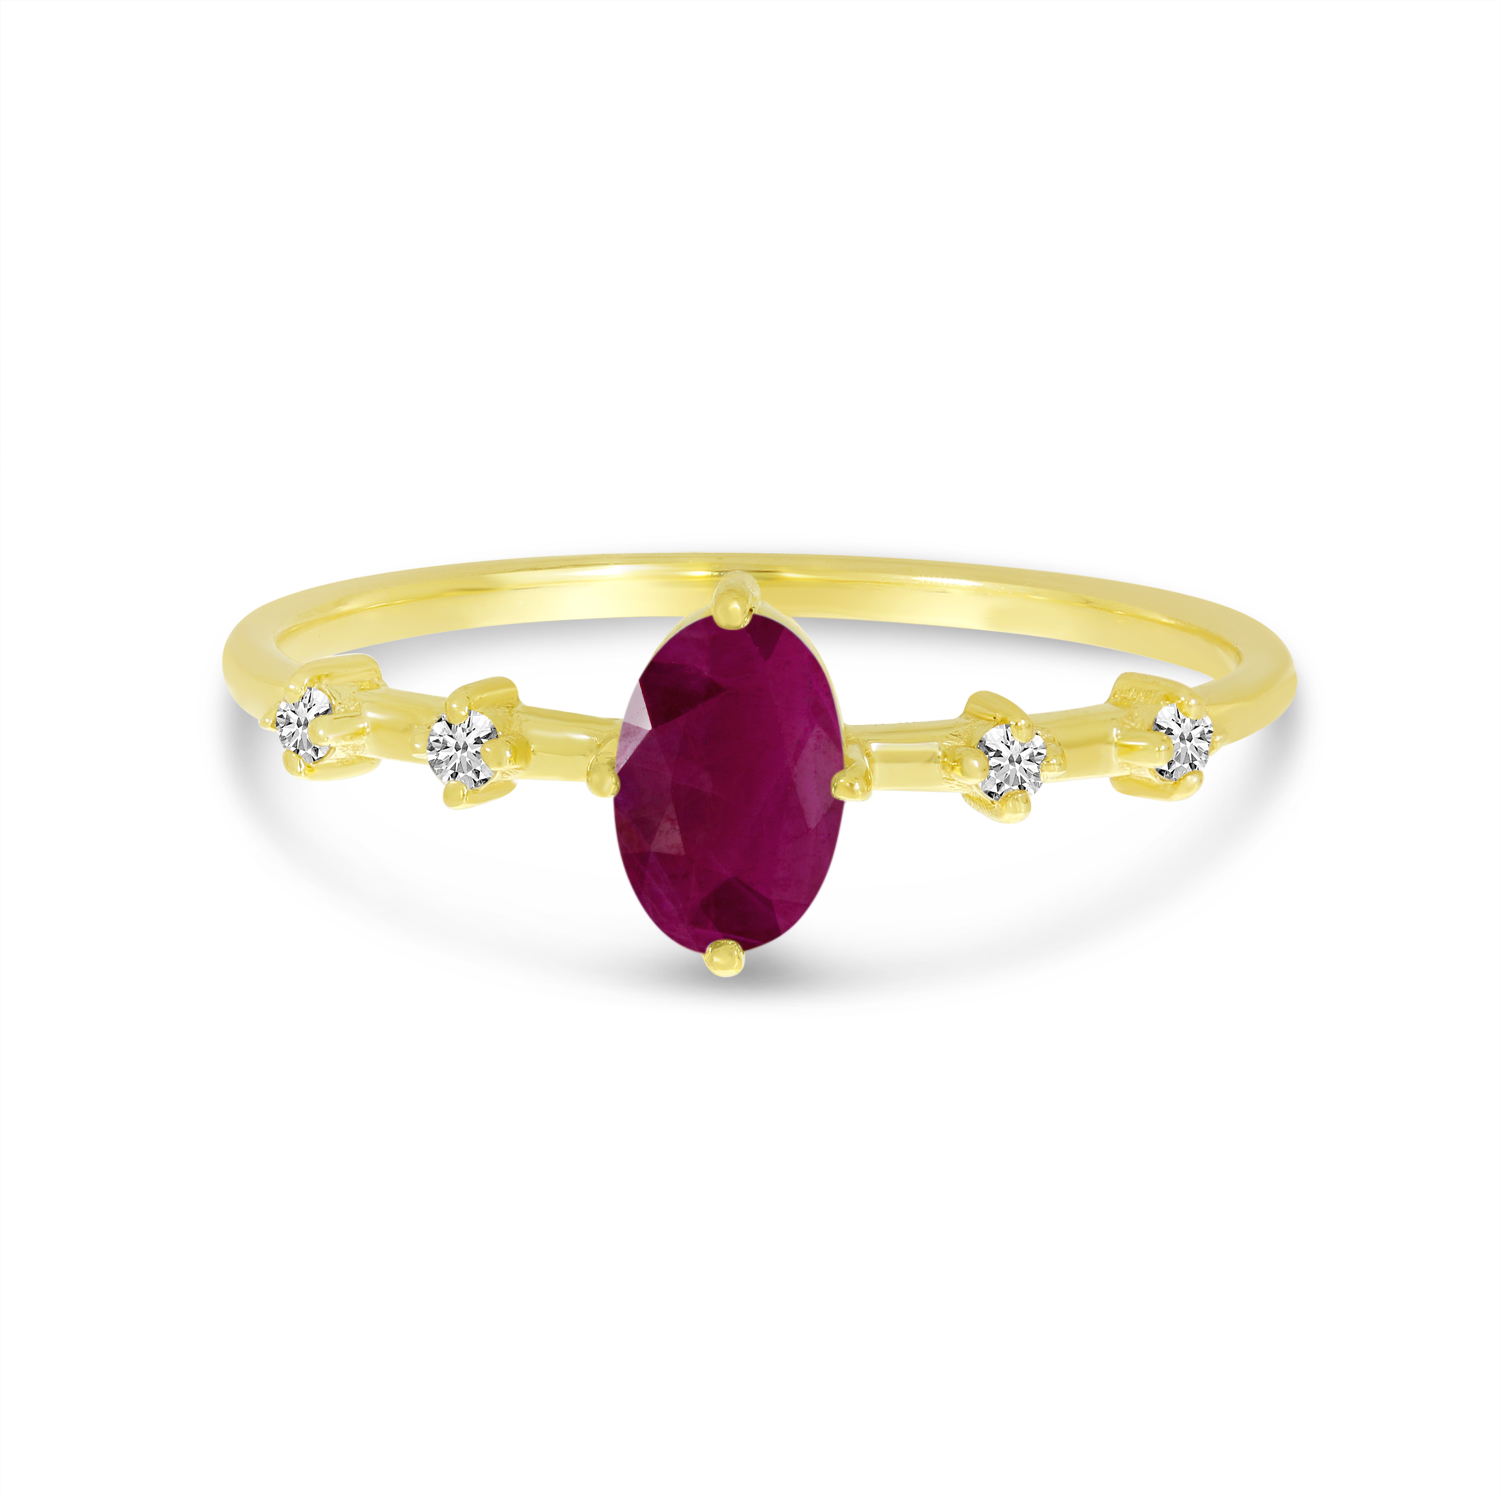 14K Yellow Gold Oval Ruby Birthstone Ring